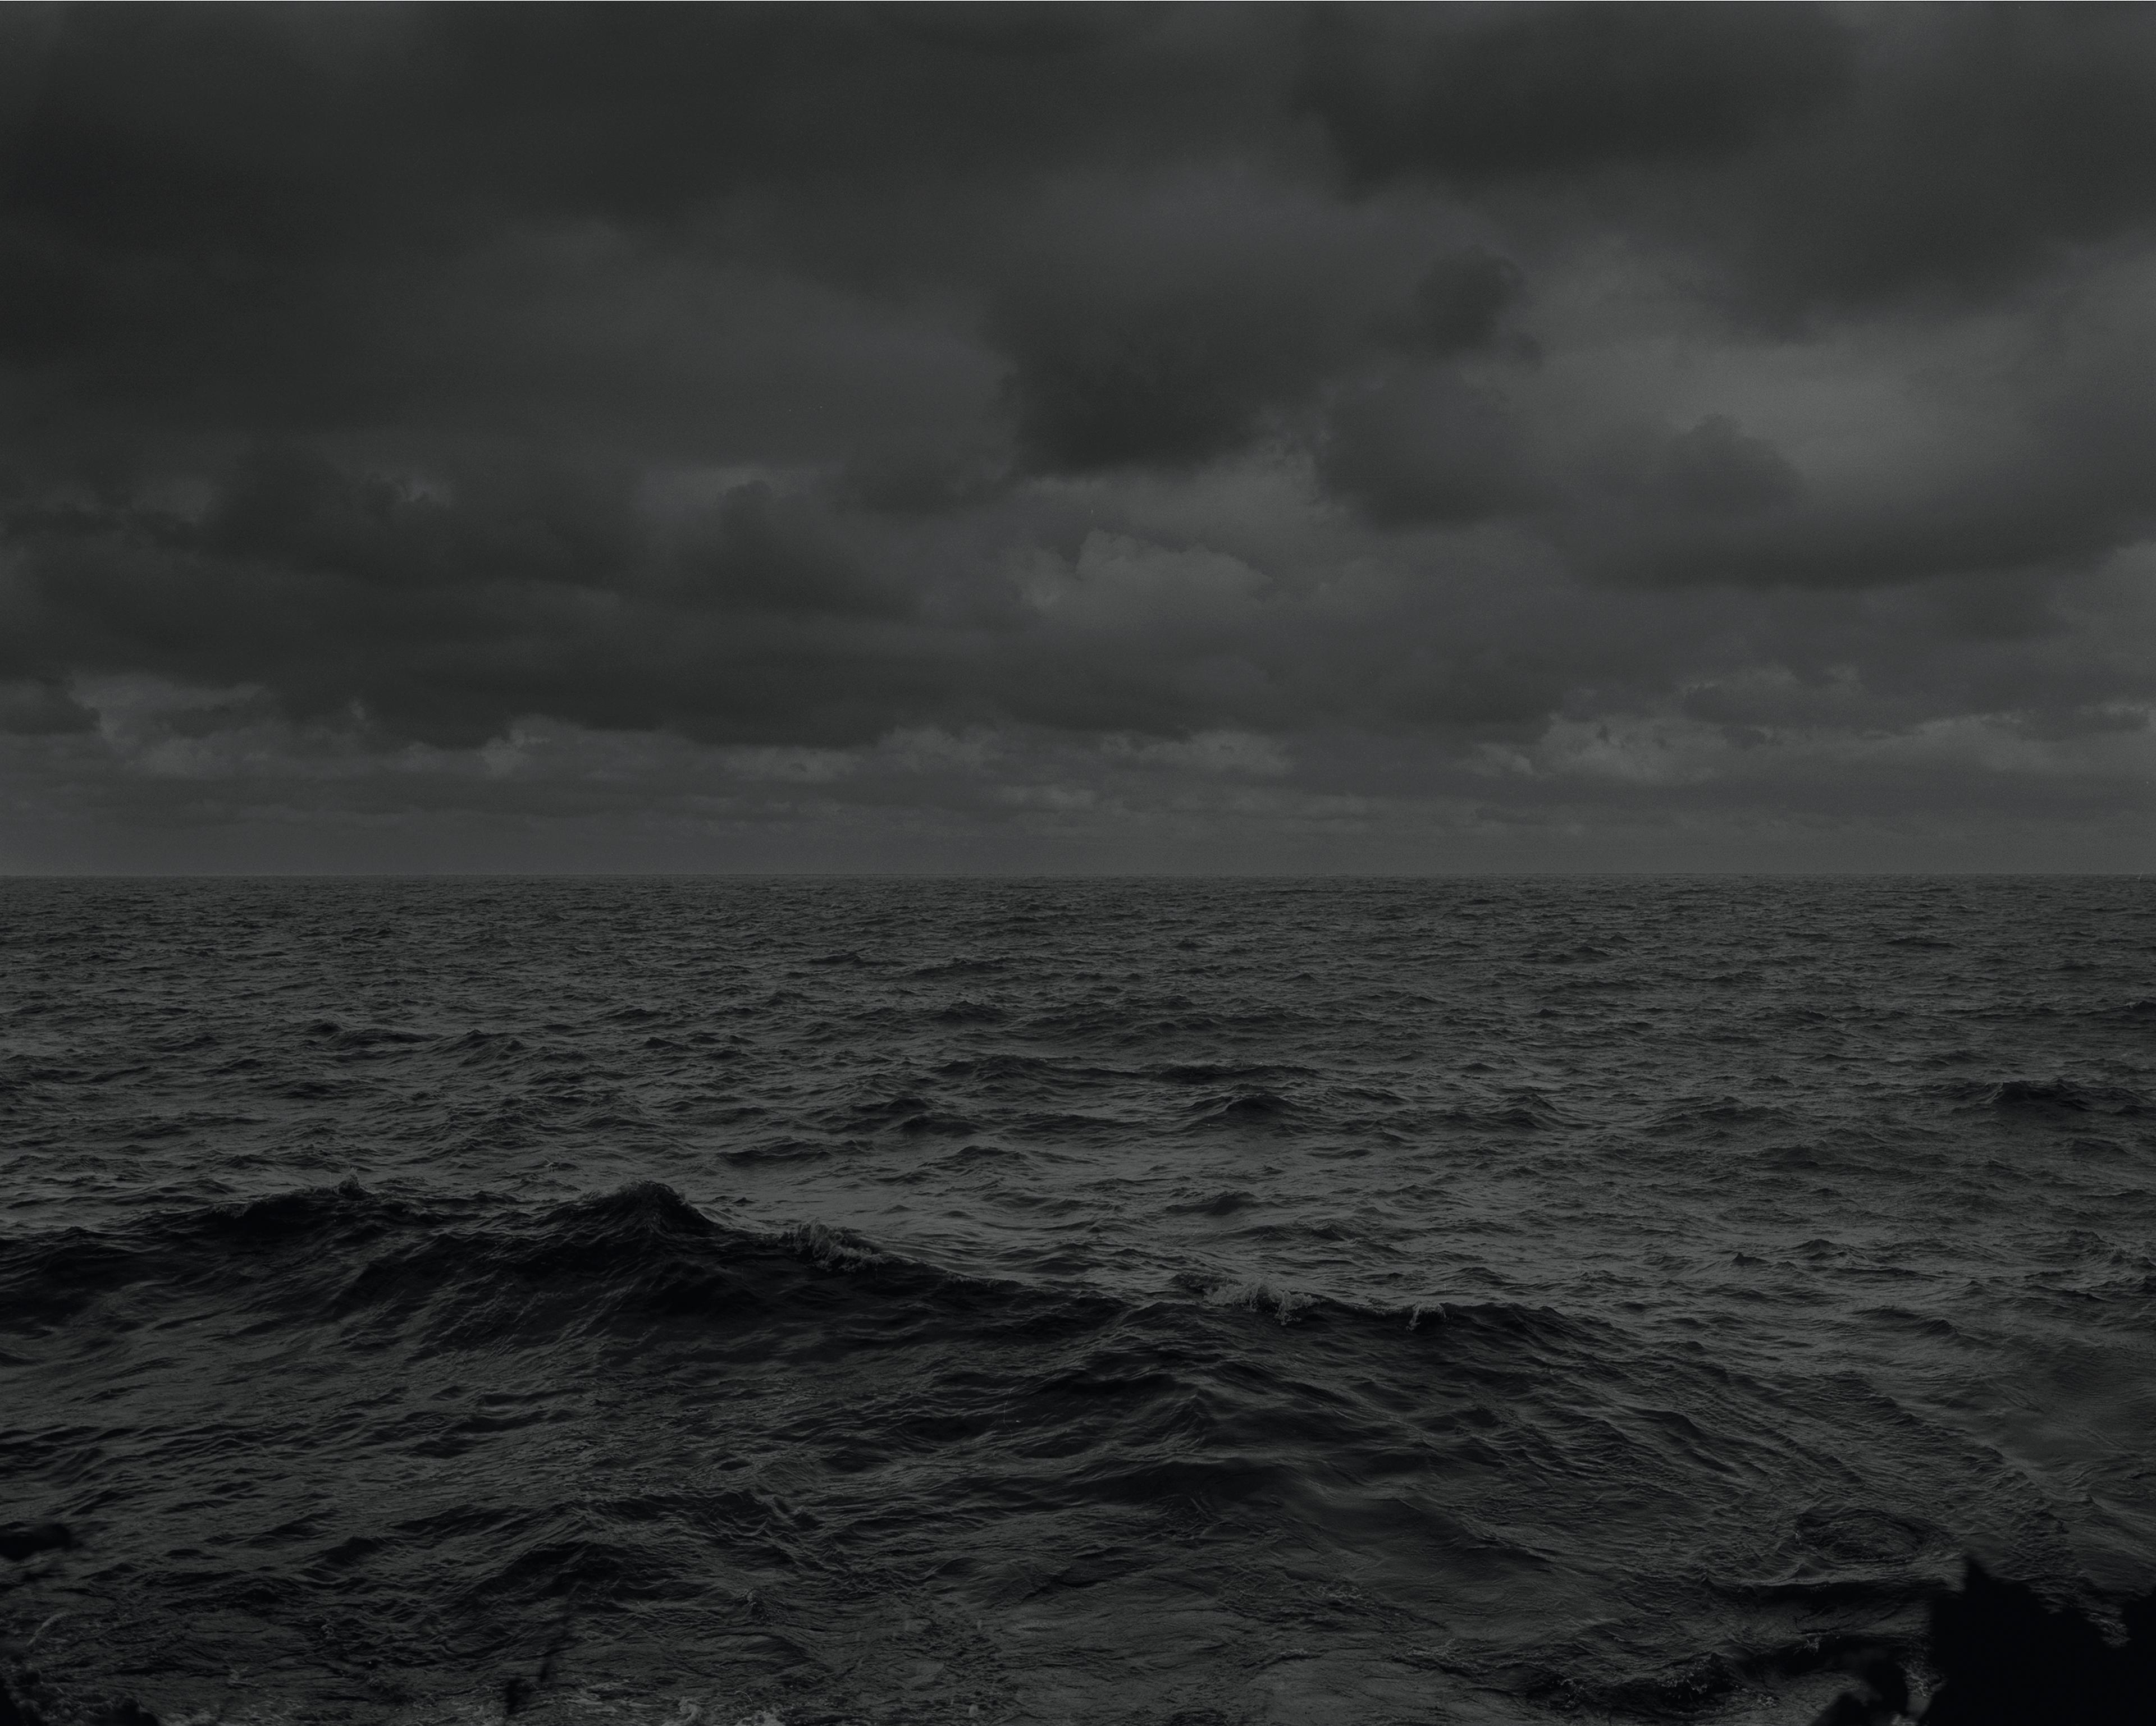 Dawoud Bey, Untitled #25 (Lake Erie and Sky), 2017